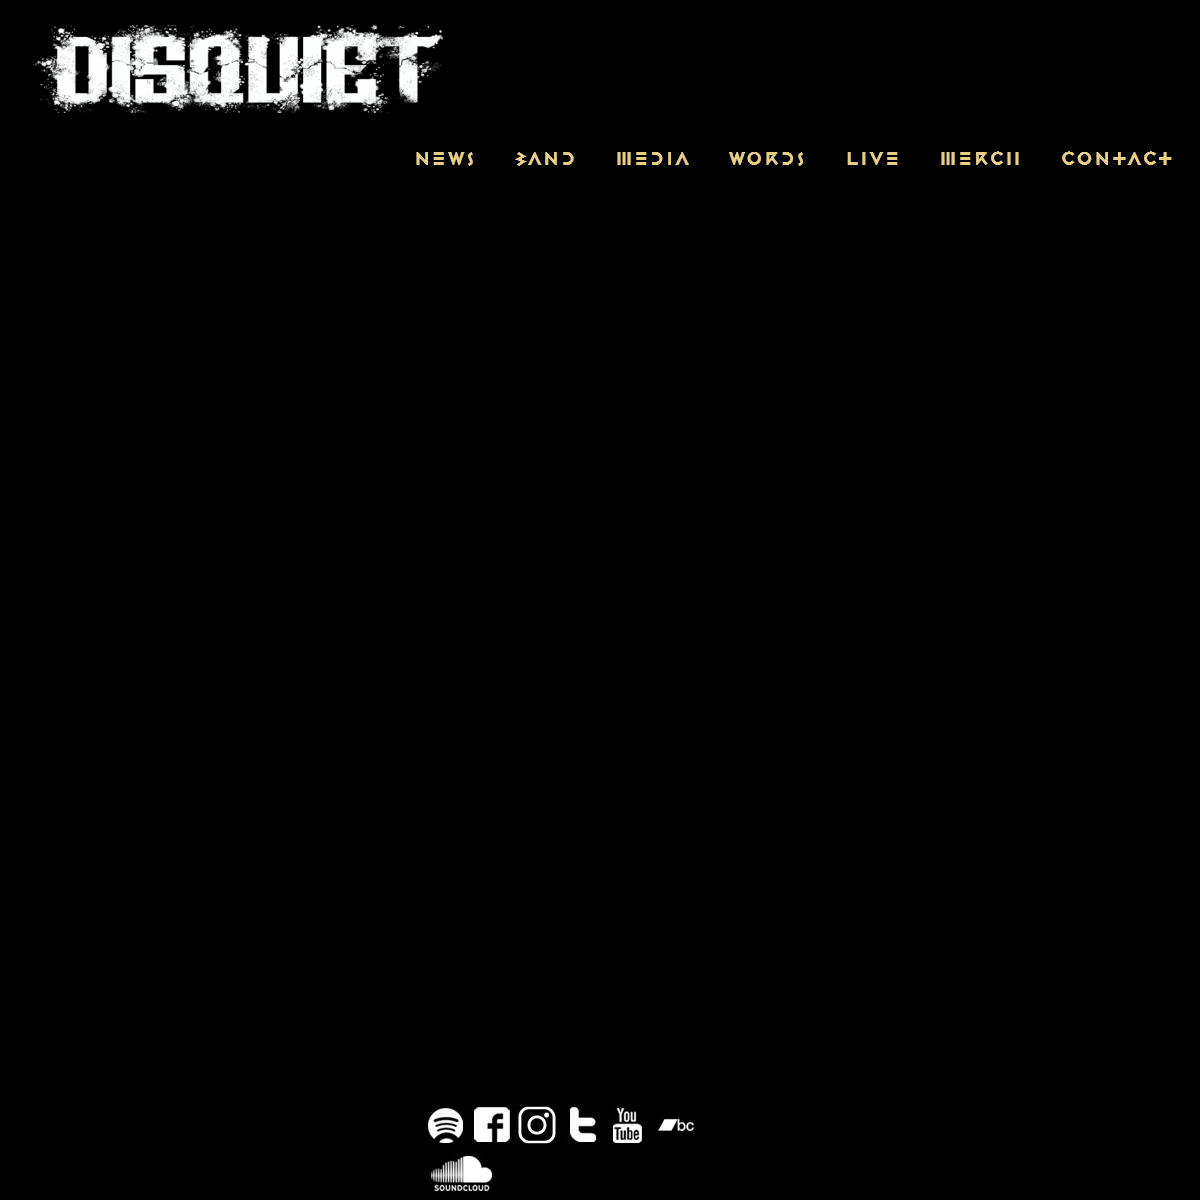 A complete backup of disquiet.nl